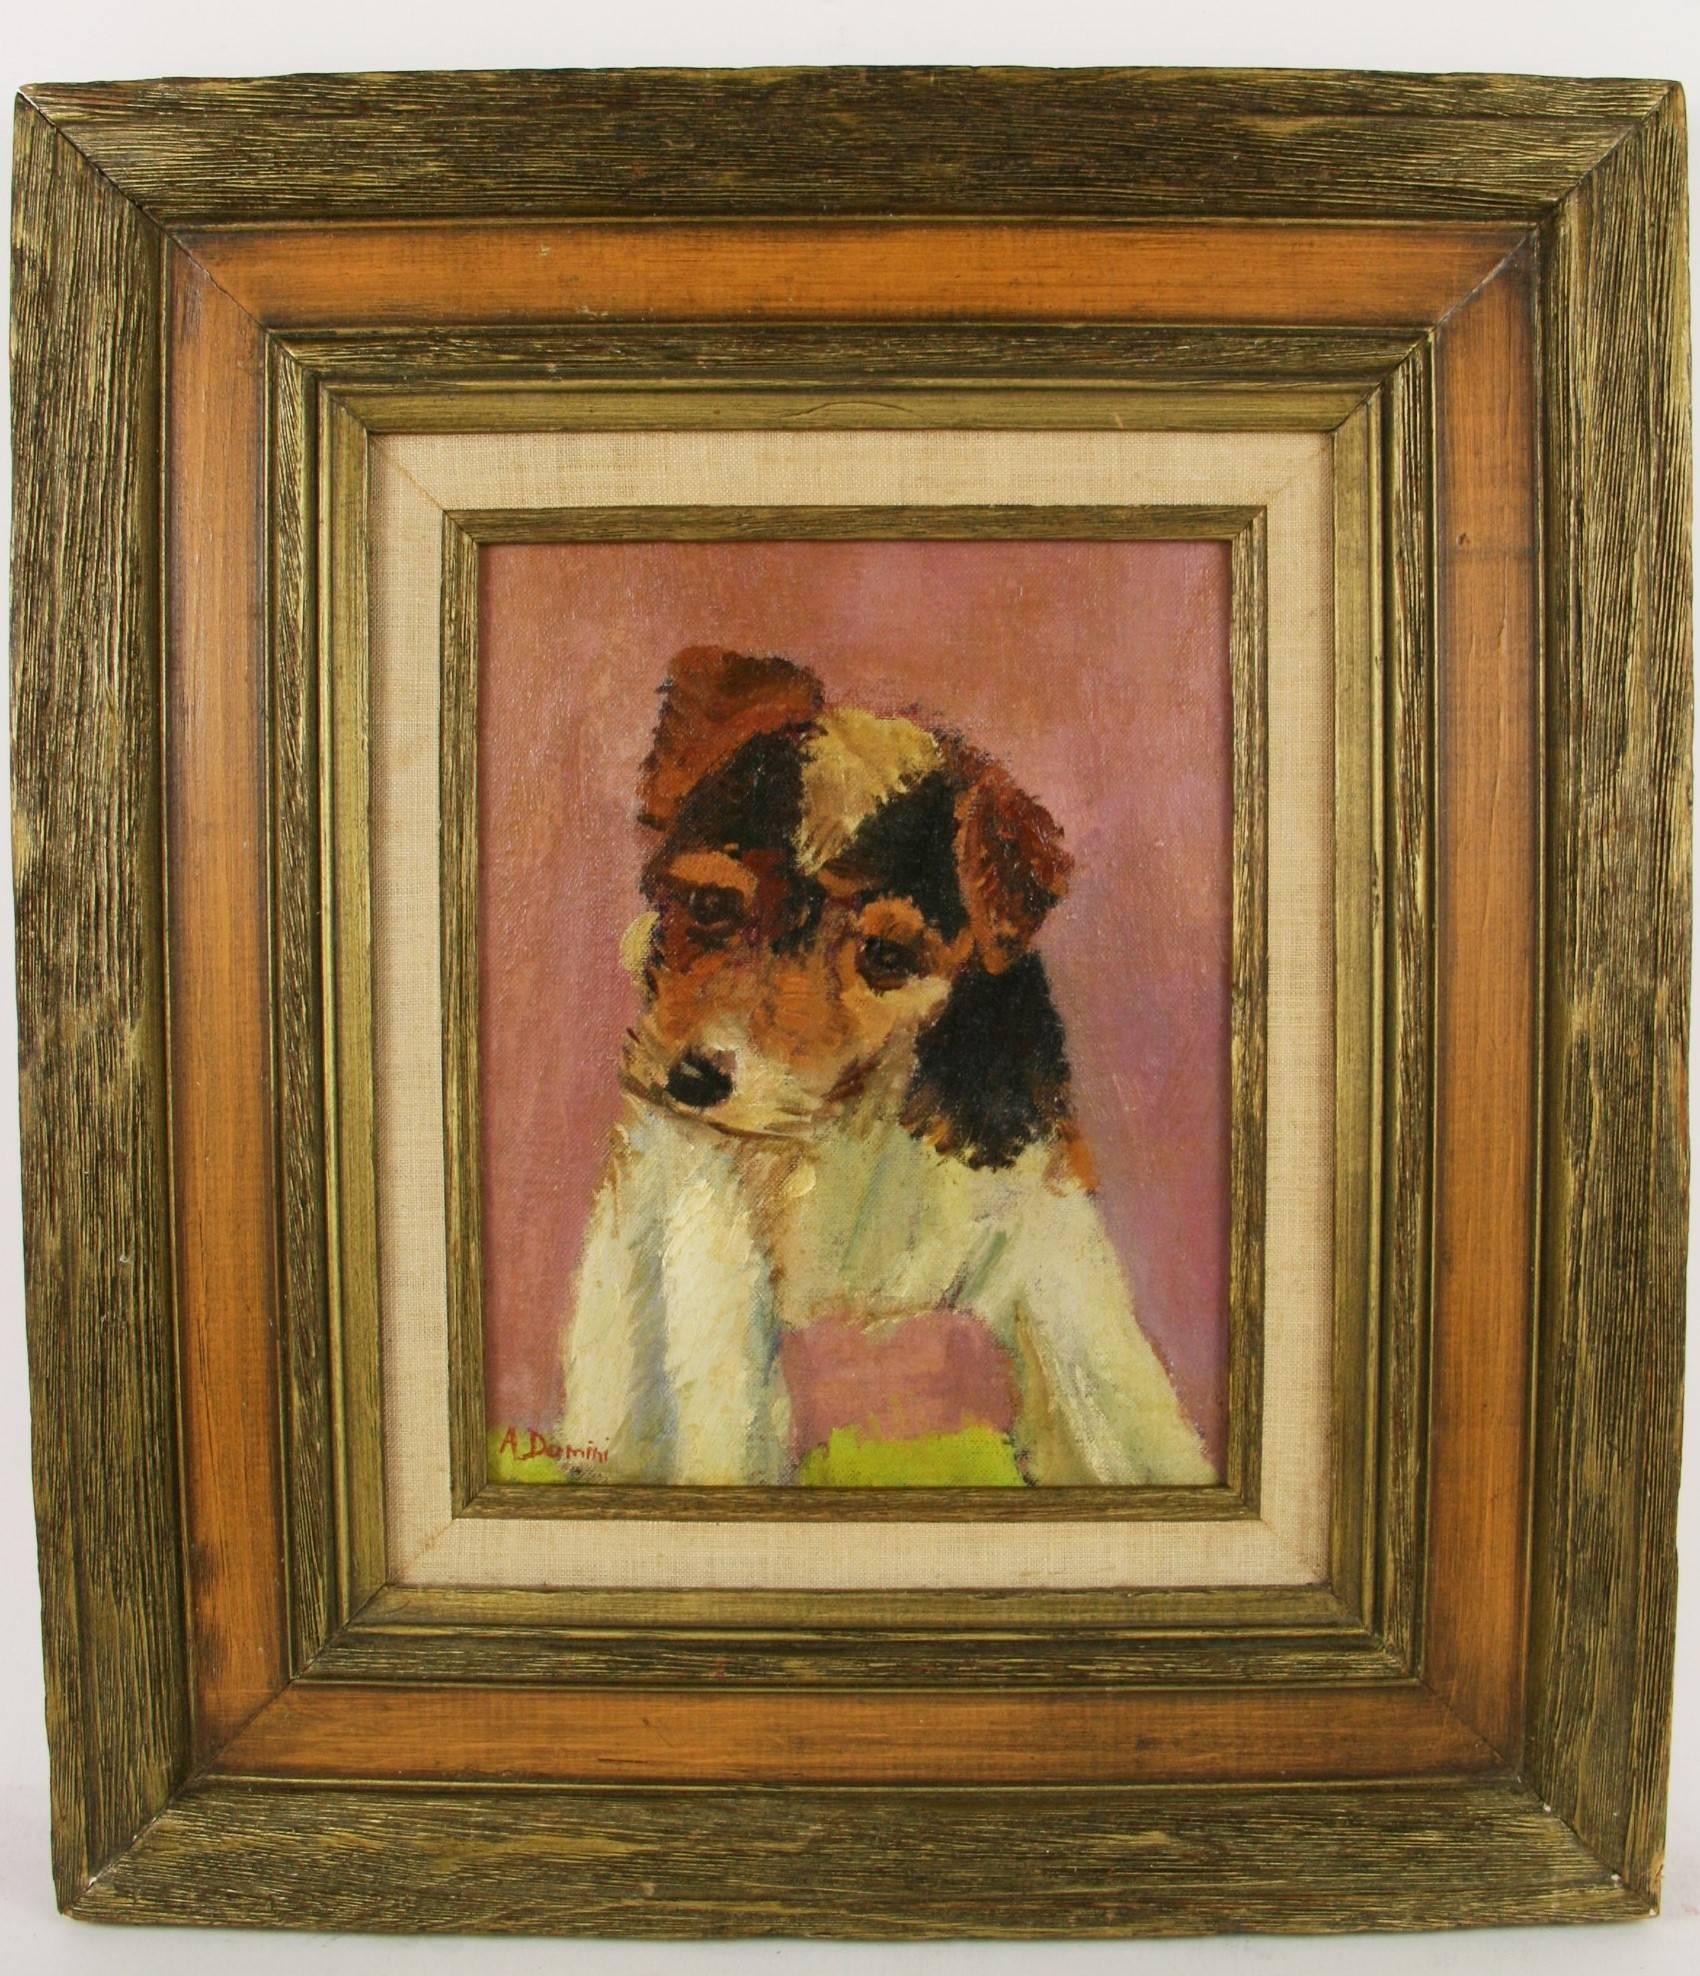 #5-2832 A vintage acrylic on artist bord set in a wood frame,signed lower left by A.Domini